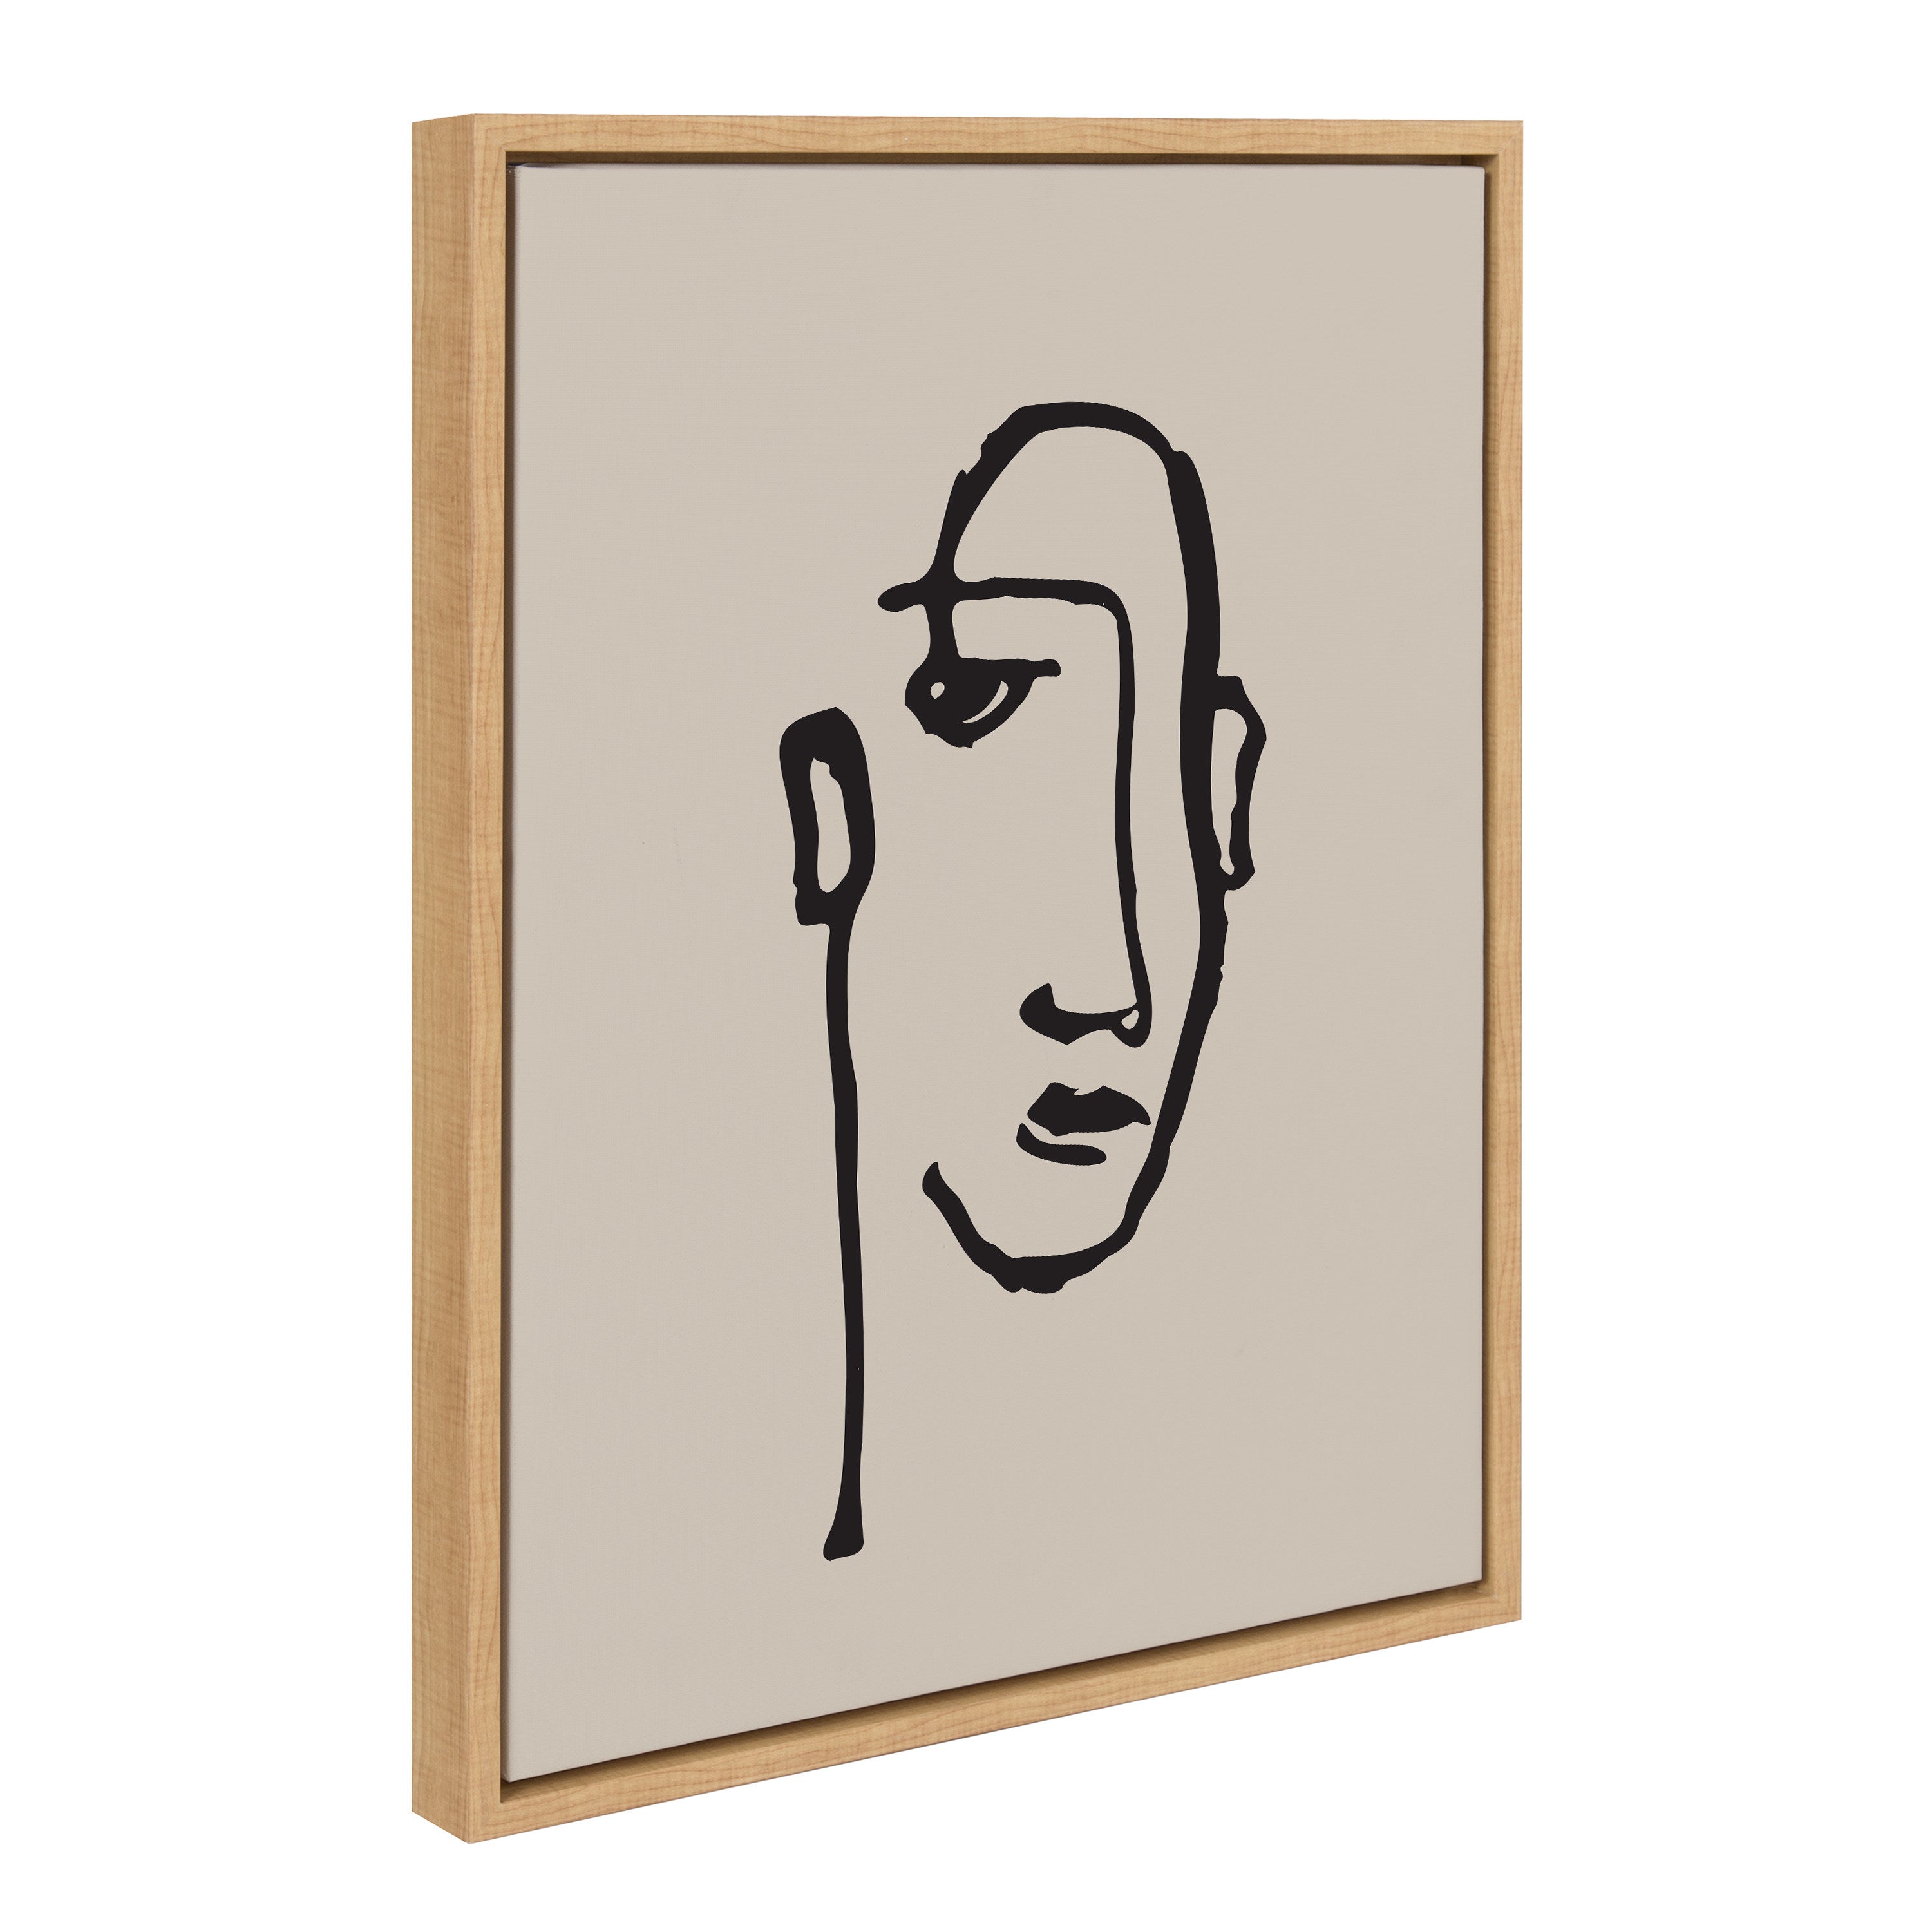 Sylvie Minimalist Neutral Line Art Drawing Face Framed Canvas by The Creative Bunch Studio